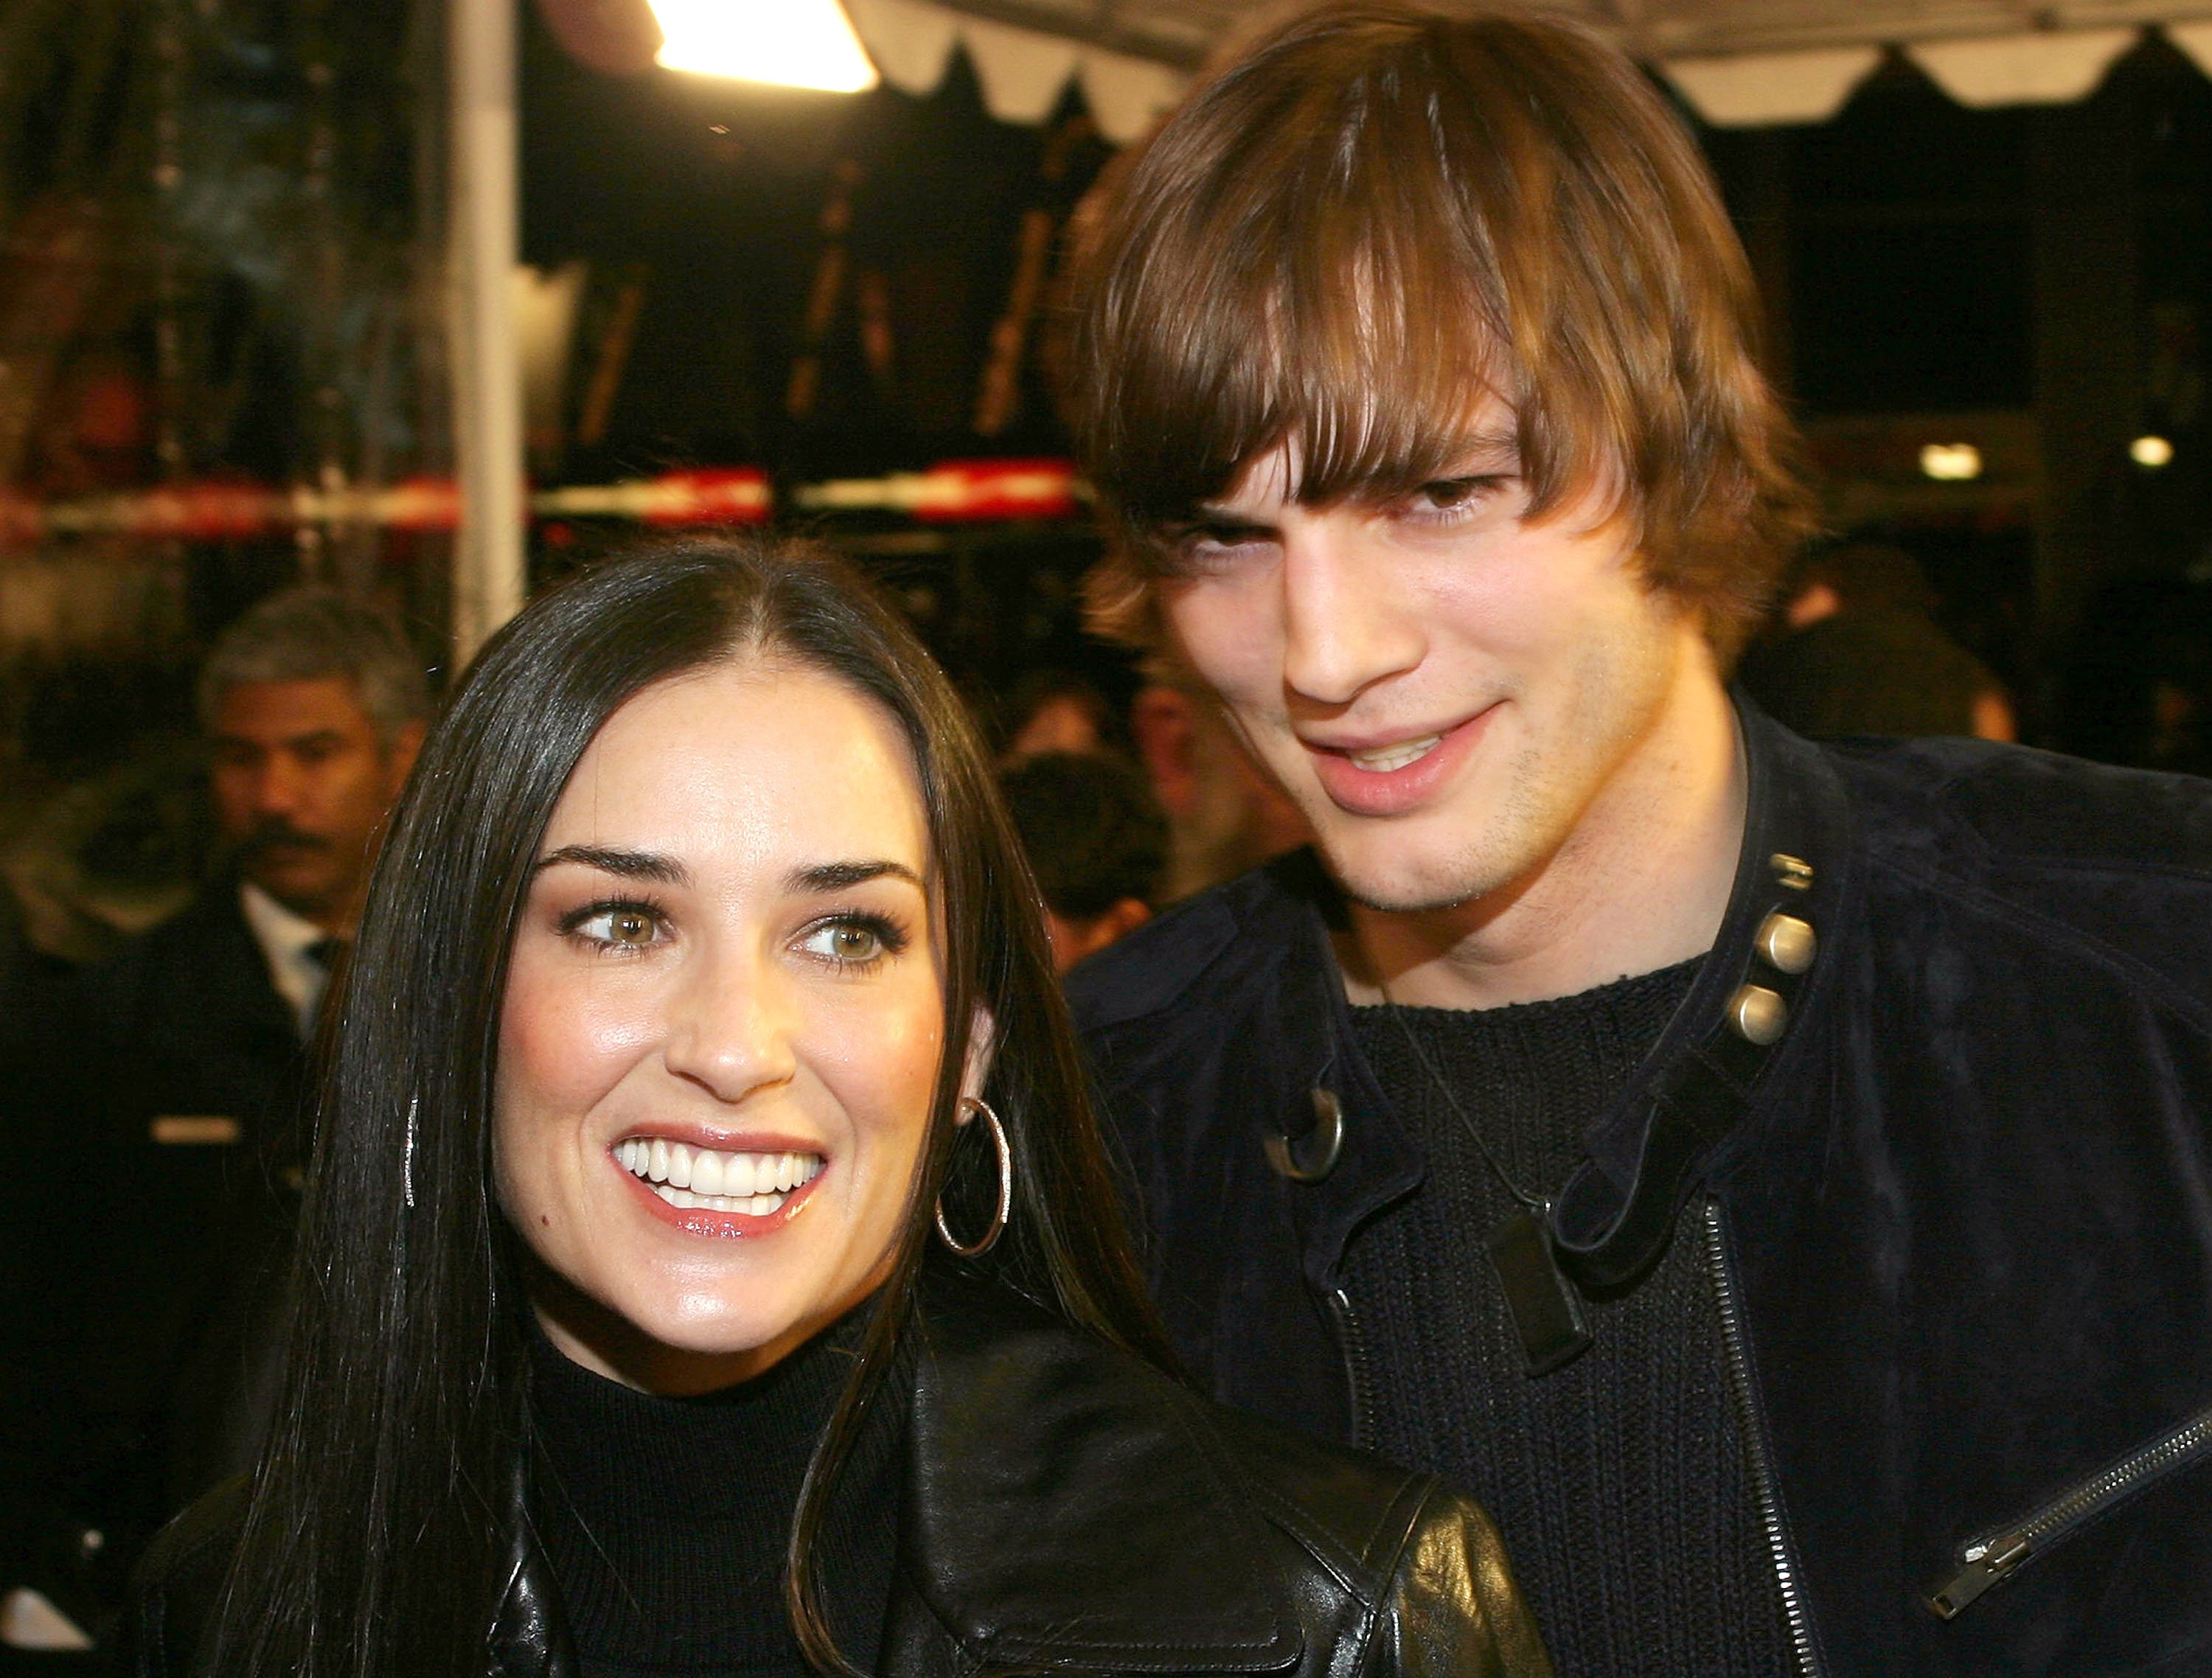 Actress Demi Moore and aactor Ashton Kutcher on December 14 2003 | Source: Getty Images